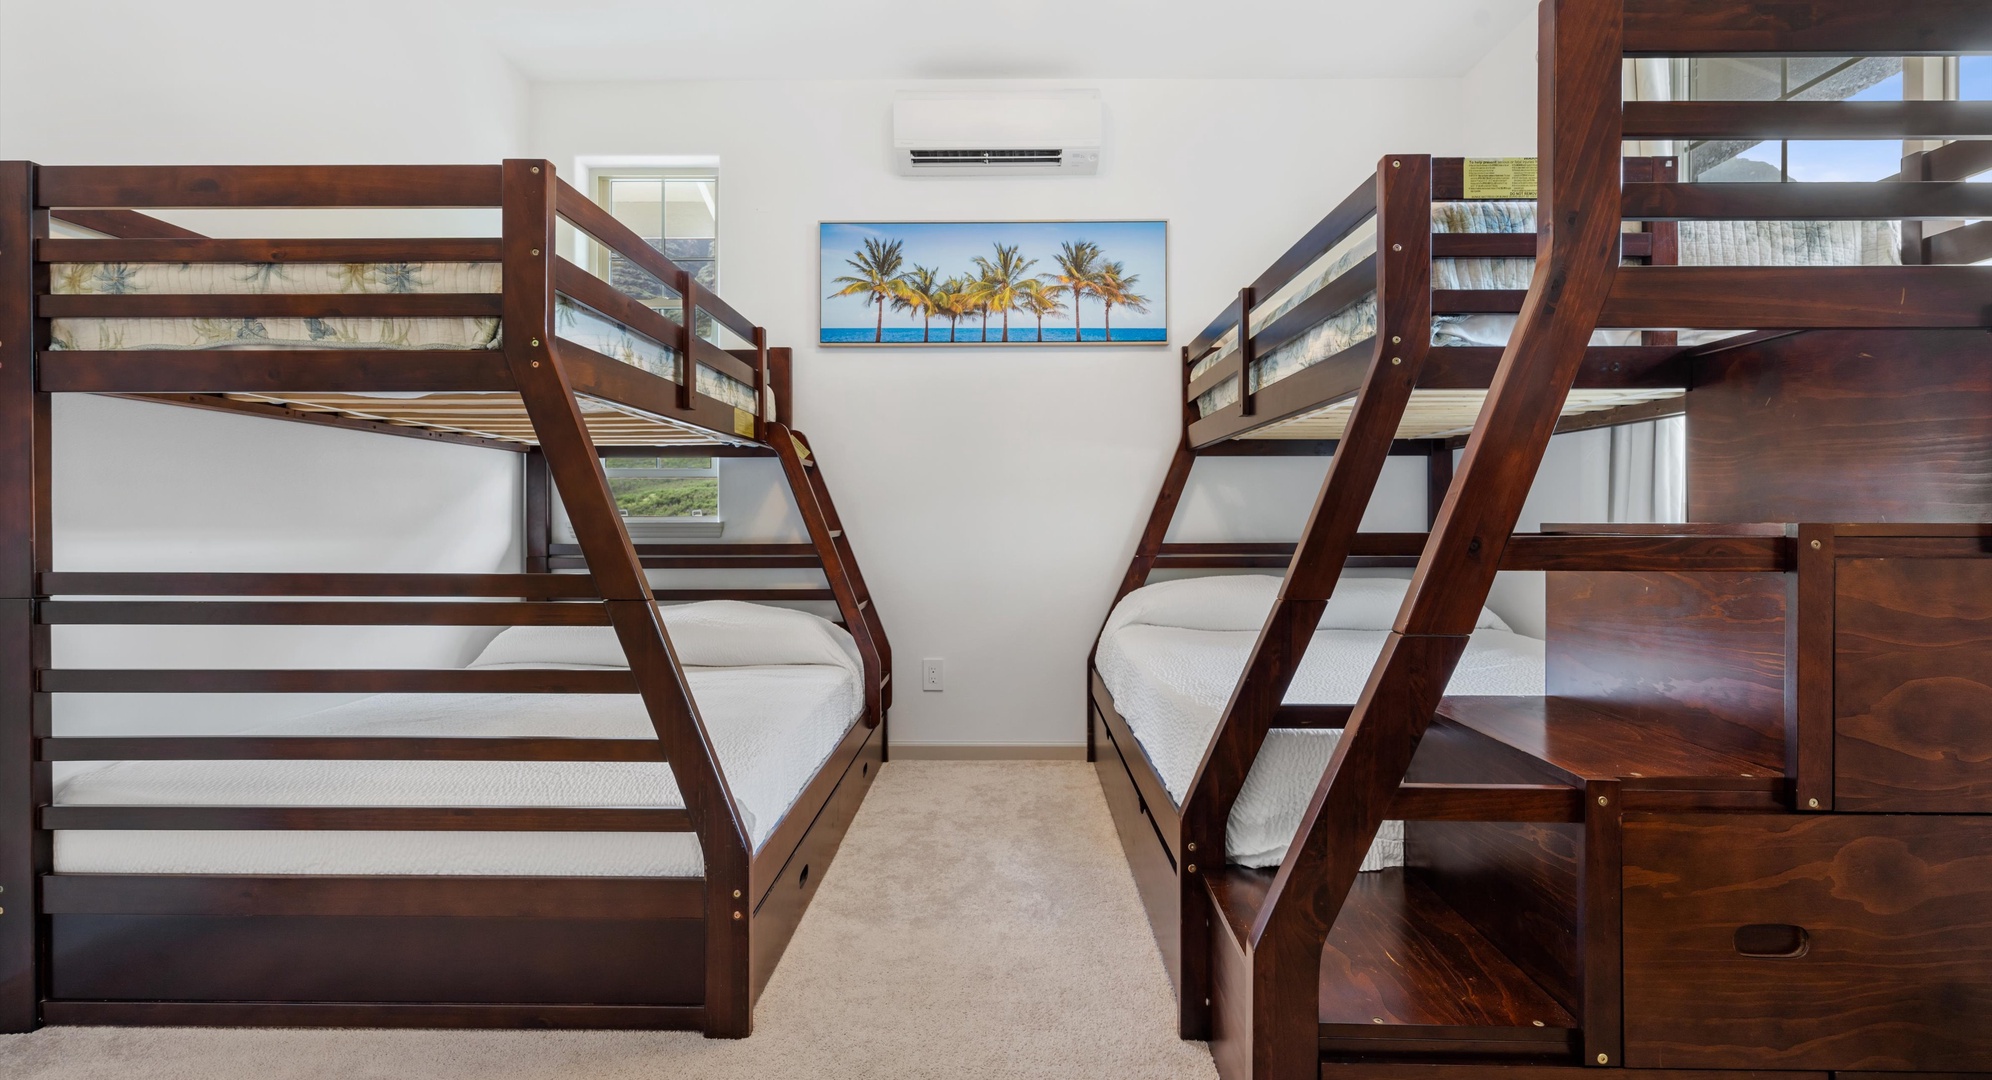 Waianae Vacation Rentals, Makaha Cottages Mauna Olu #76 - 3 - Guest bedroom with two bunks with twin over full size beds, and one pullout twin size trundle bed.